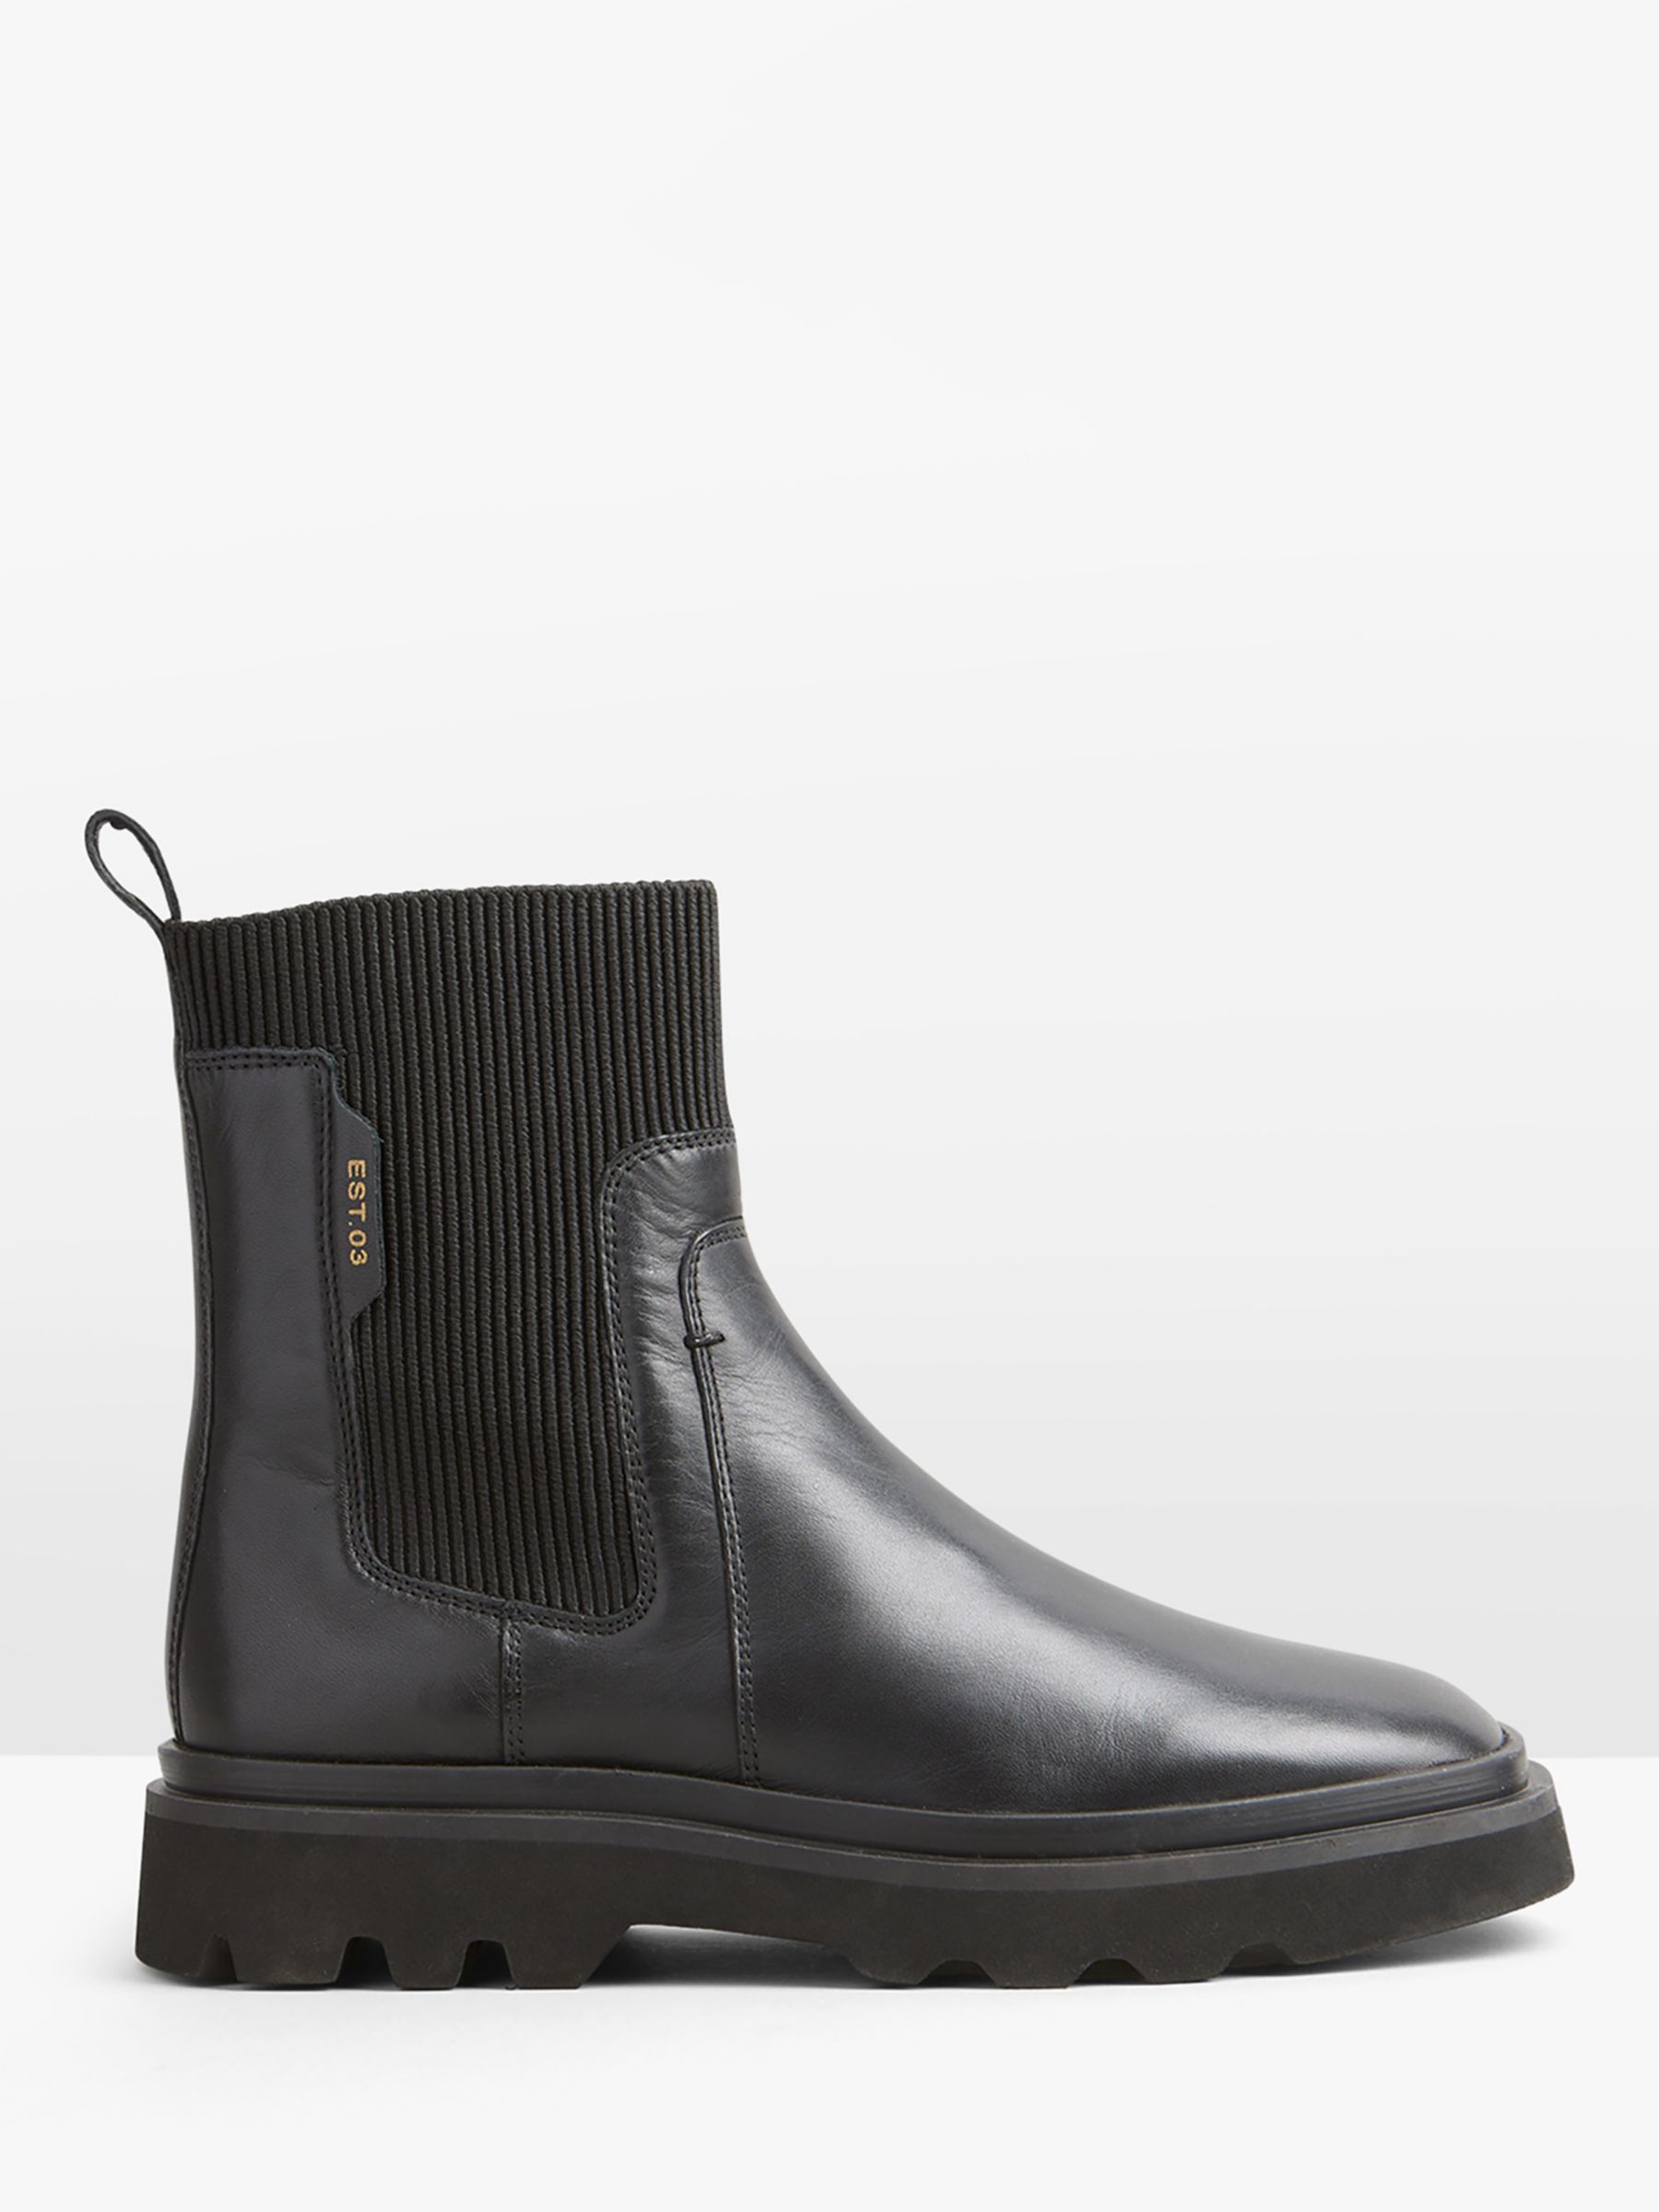 HUSH Pacey Chunky Leather Chelsea Boots, Black at John Lewis & Partners